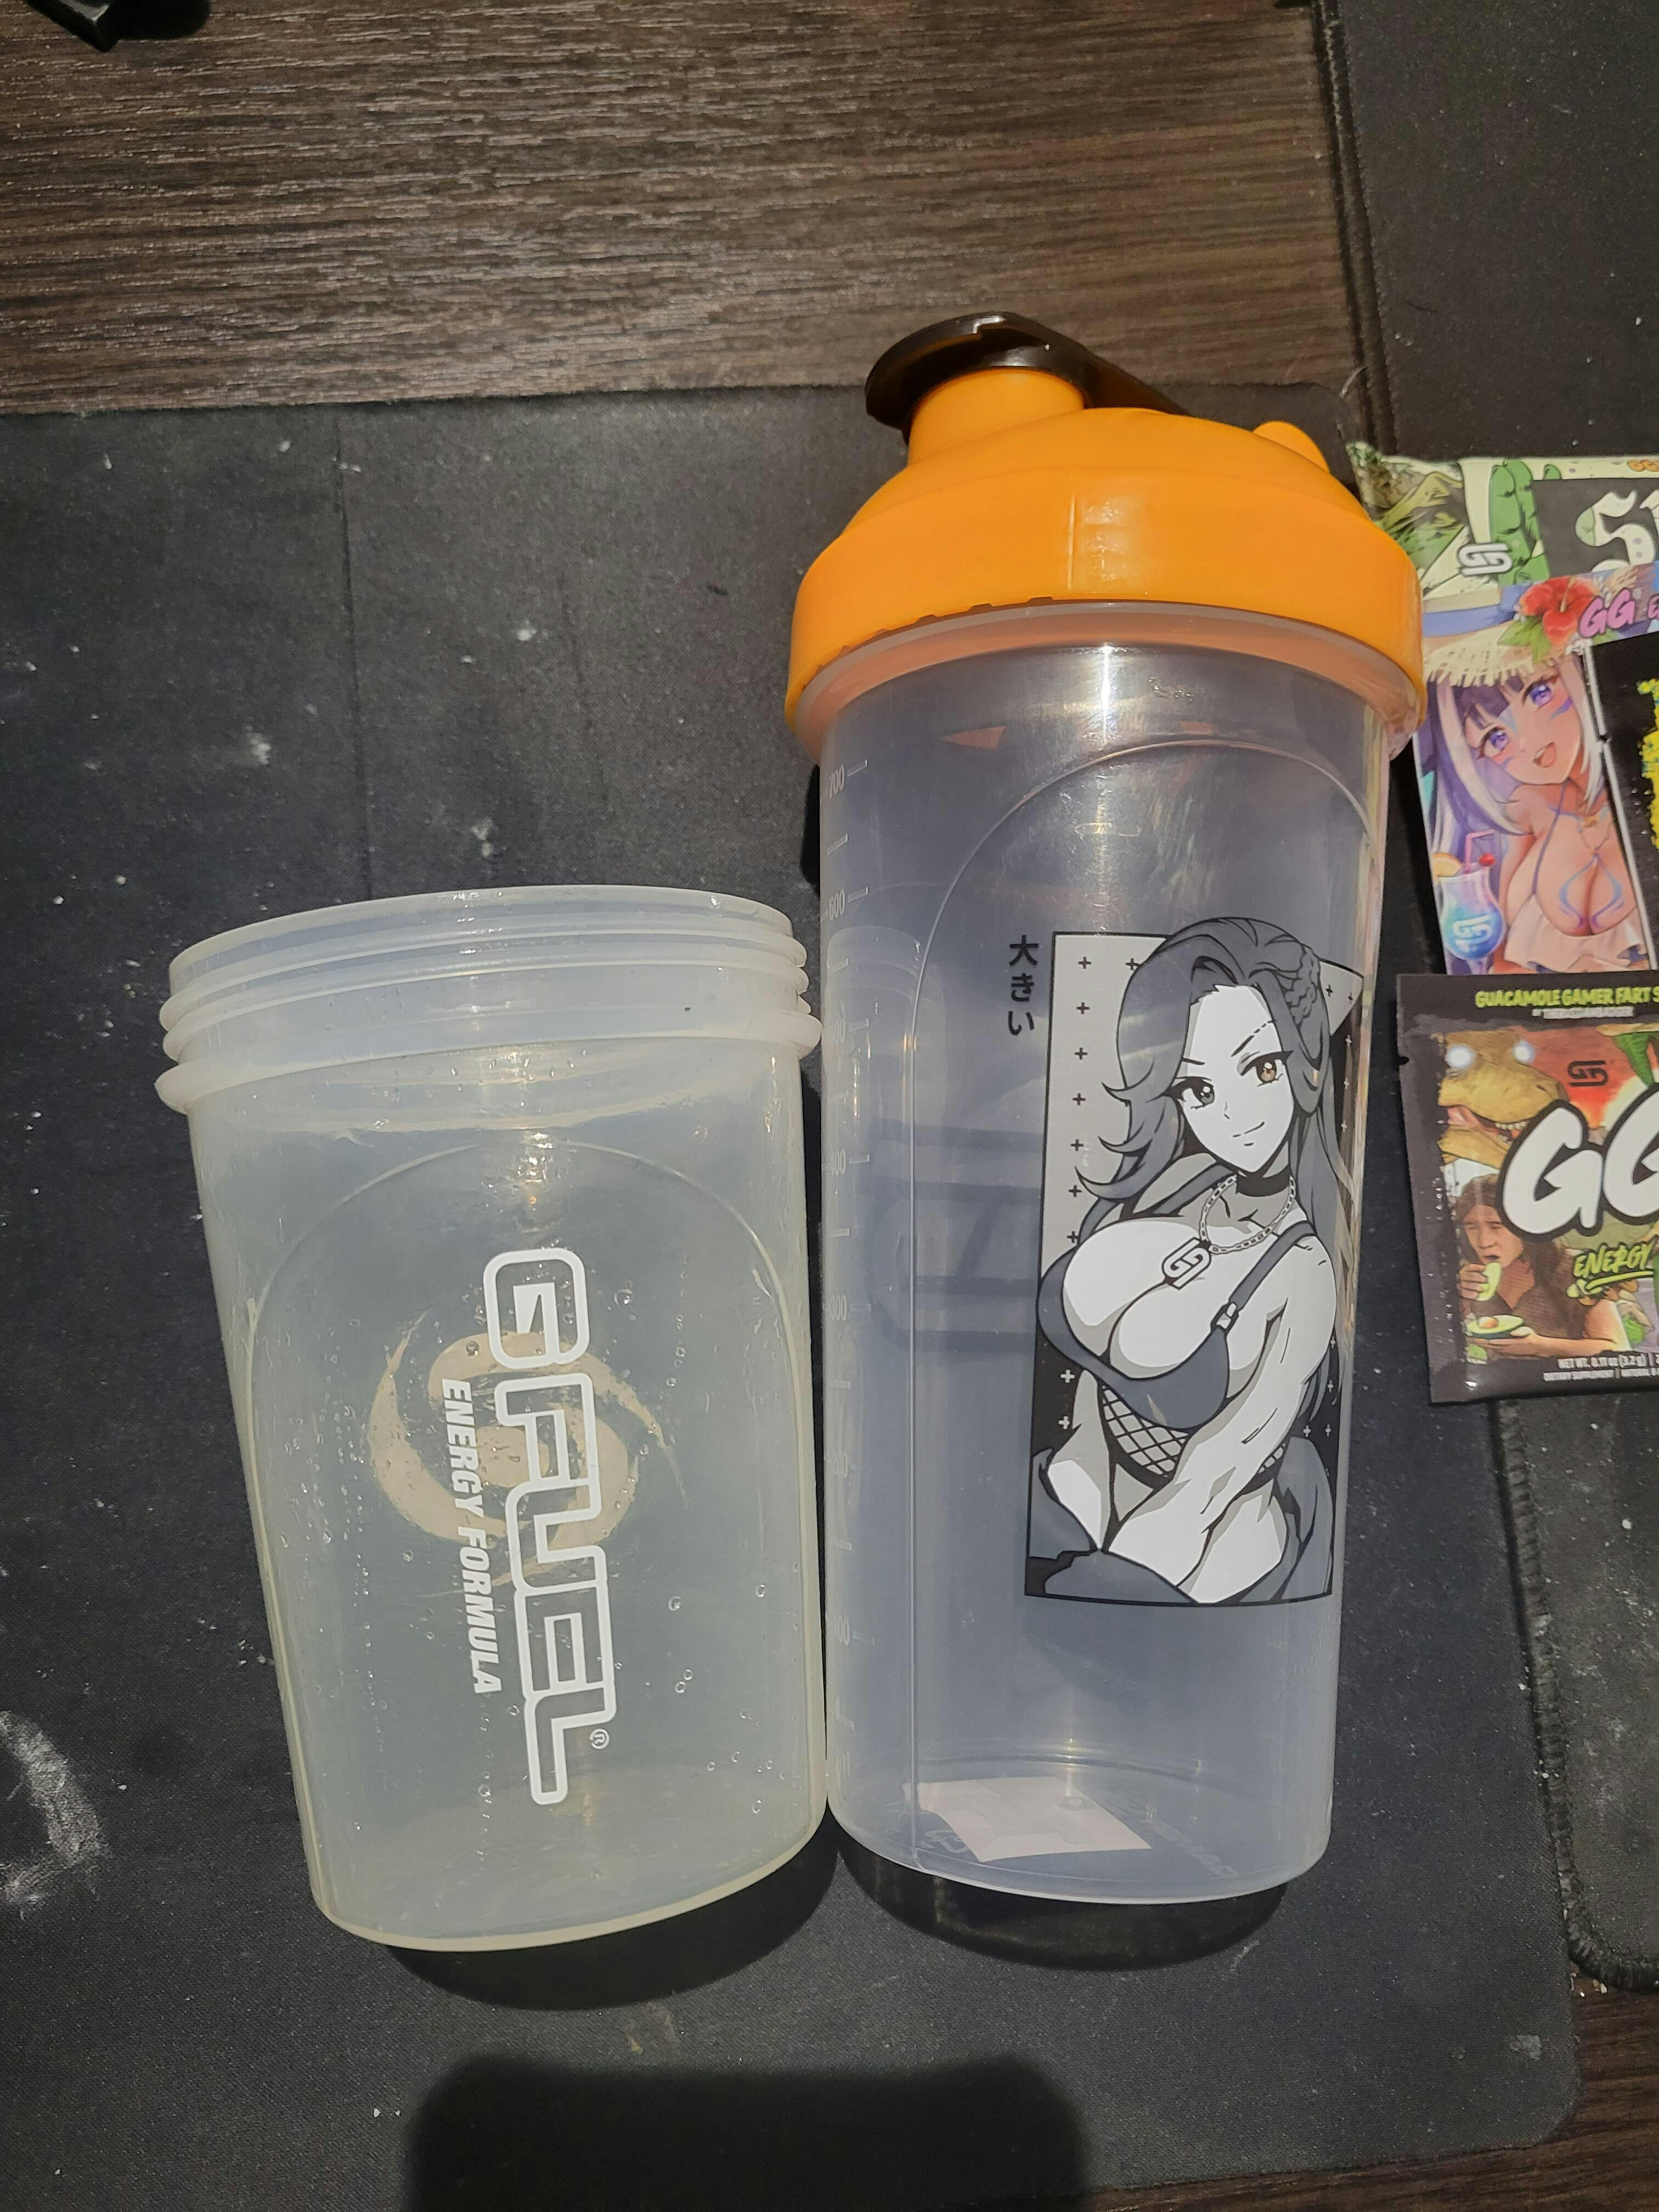 GamerSupps, Other, Gamersupps Waifu Cups X Rainhoe Shaker Cup New In Hand  Ready To Ship